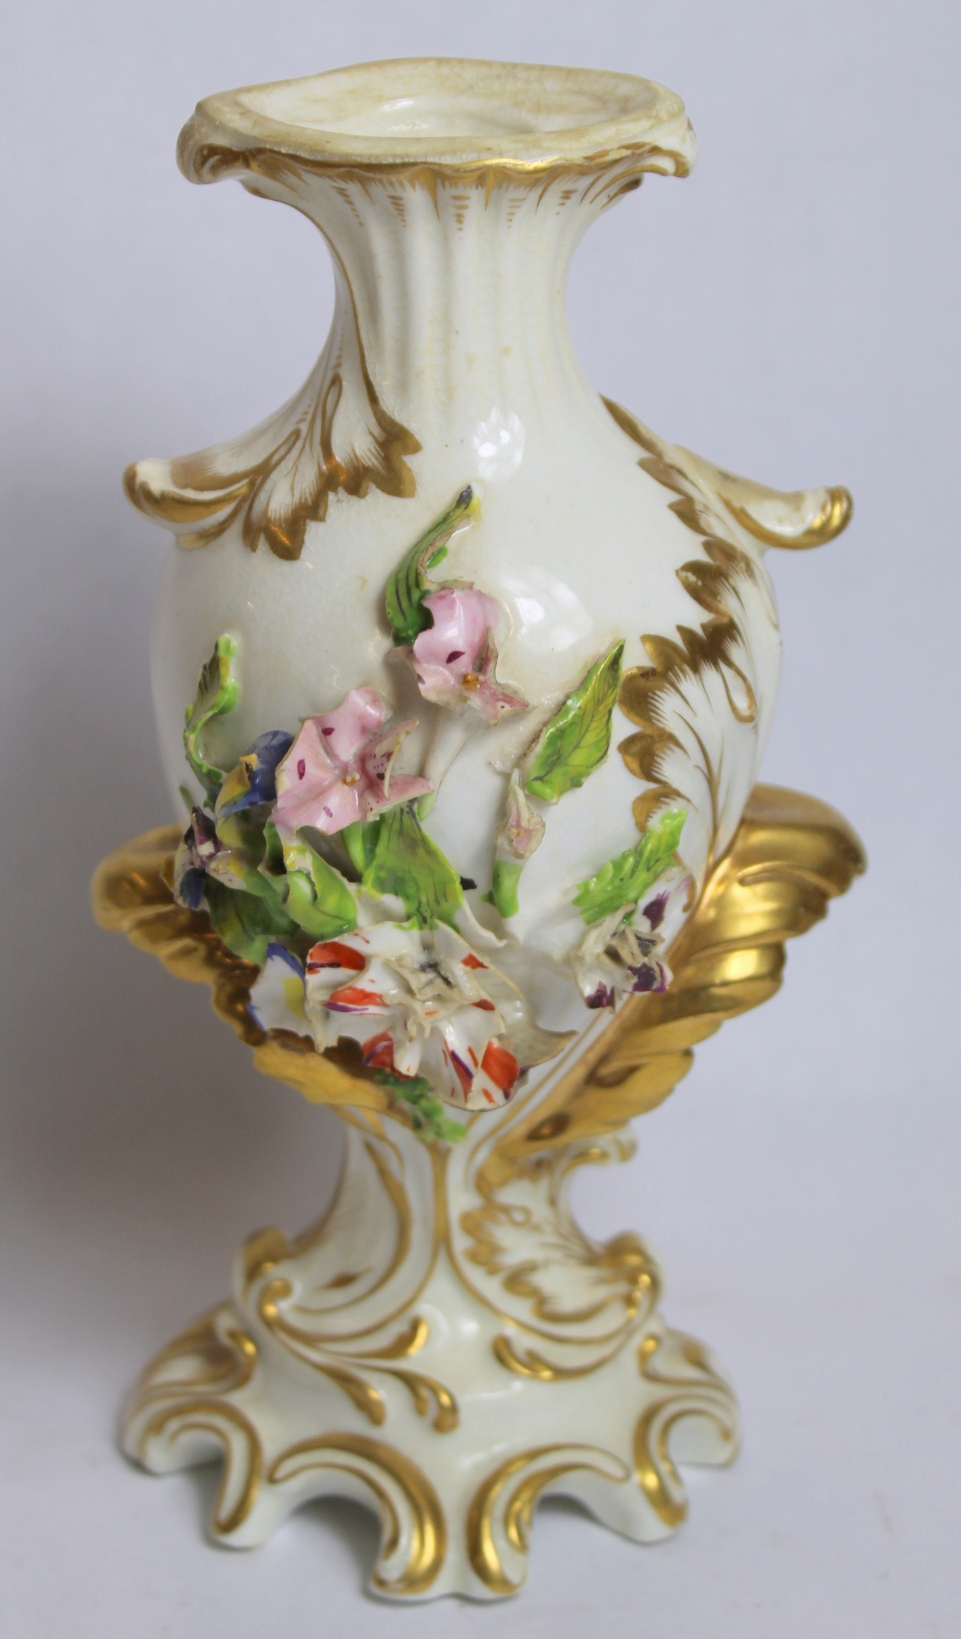 Early 19th century Derby porcelain vase with floral encrustation and moulded gilt foliate scrolling, - Image 3 of 11